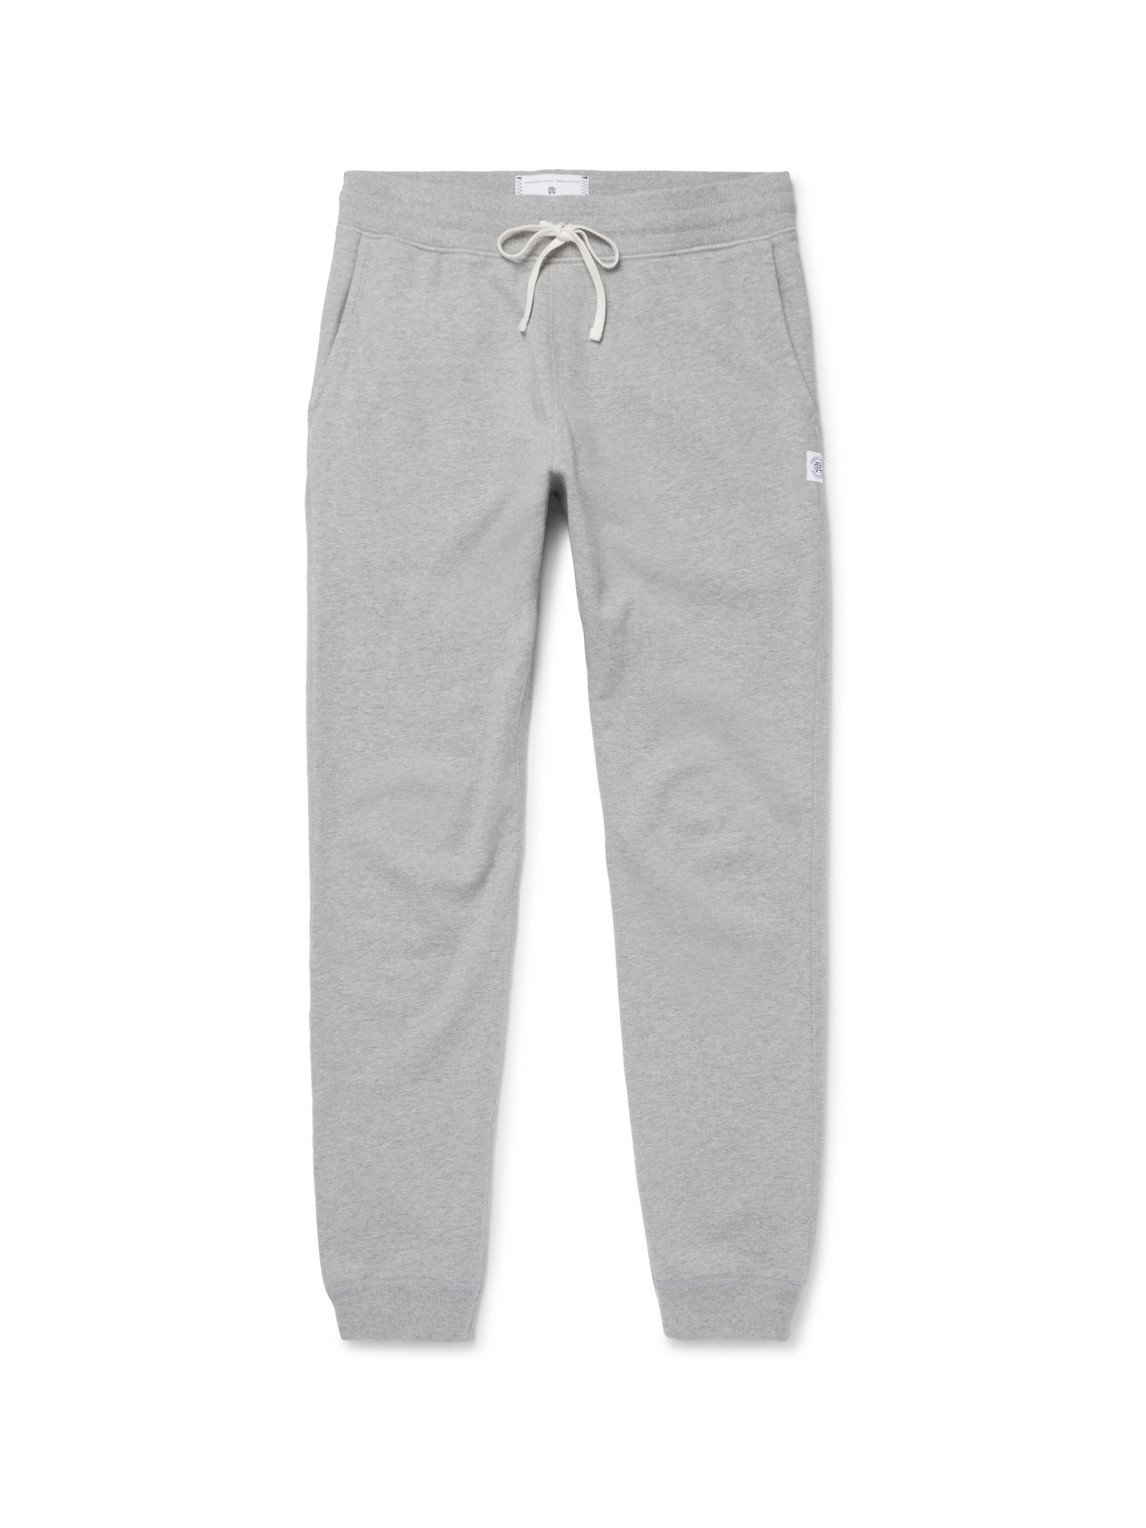 REIGNING CHAMP SLIM-FIT LOOPBACK COTTON-JERSEY SWEATPANTS